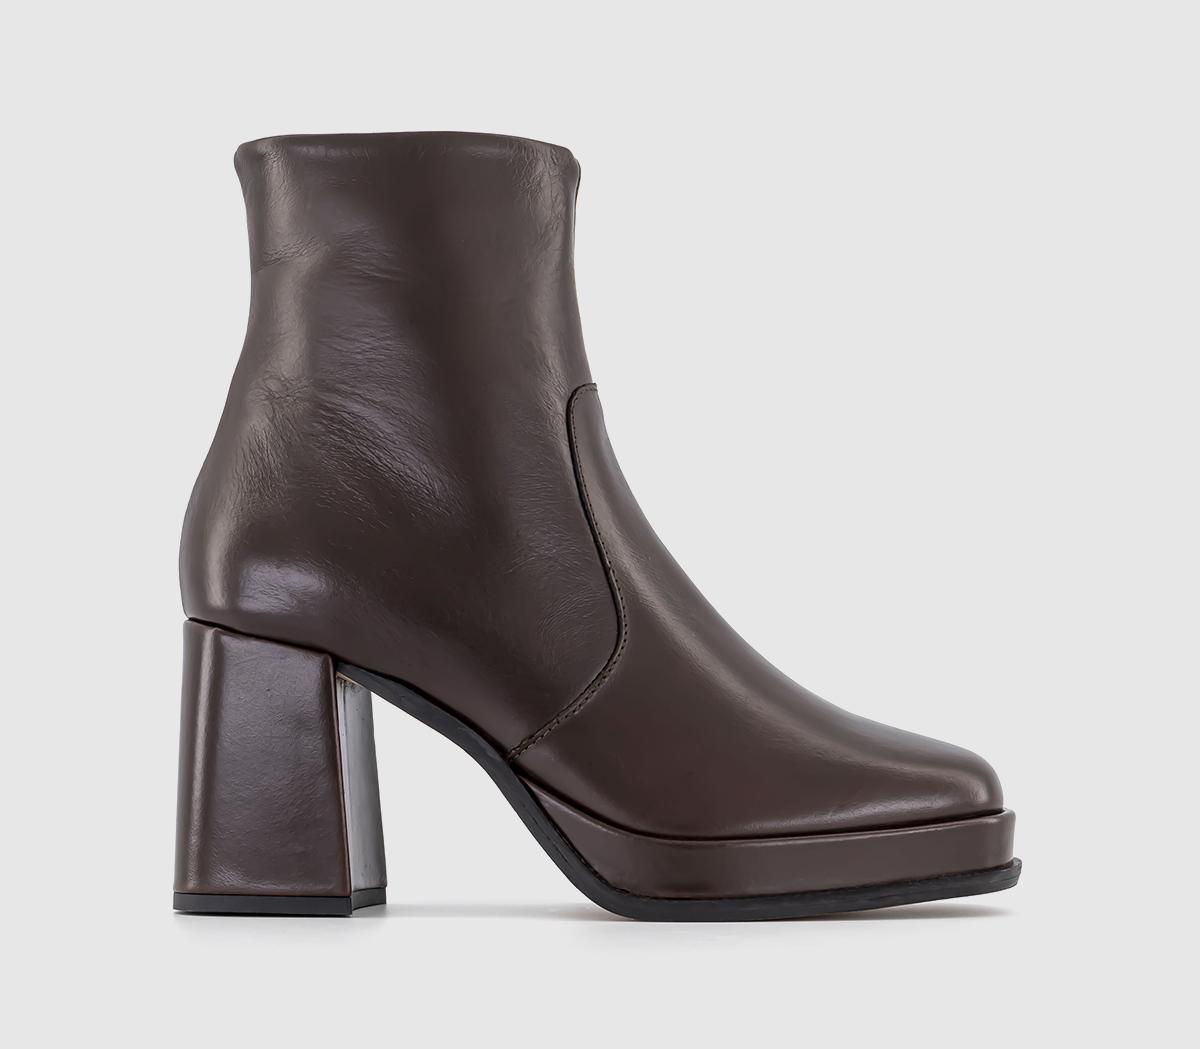 OFFICEApply Covered Platform Block Heel Ankle BootsBrown Leather